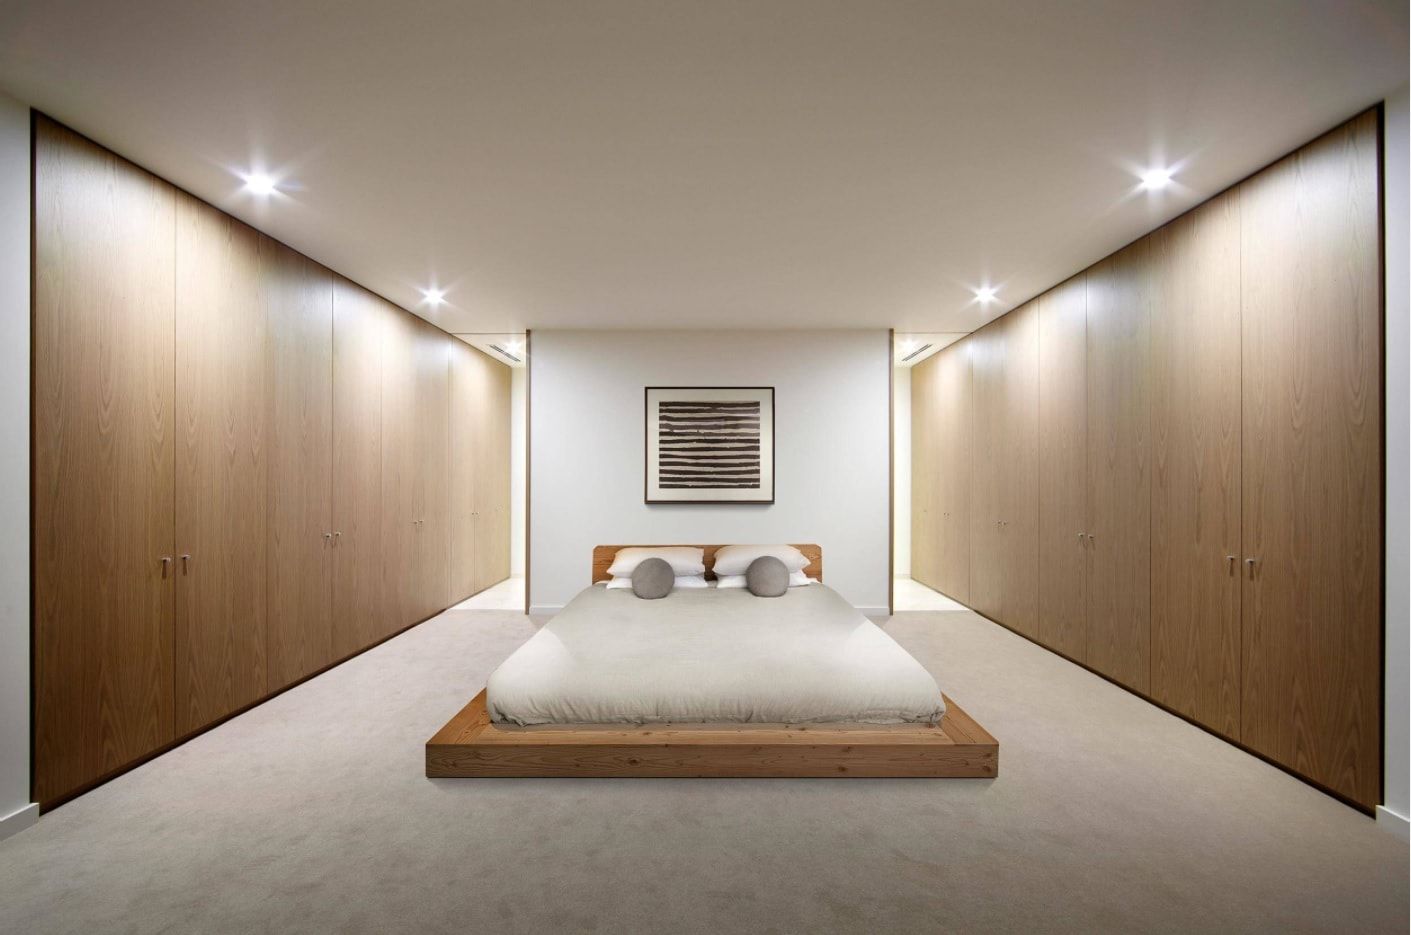 Unusual usage of mirrors to create the sensation of long room in the minimalistic bedroom